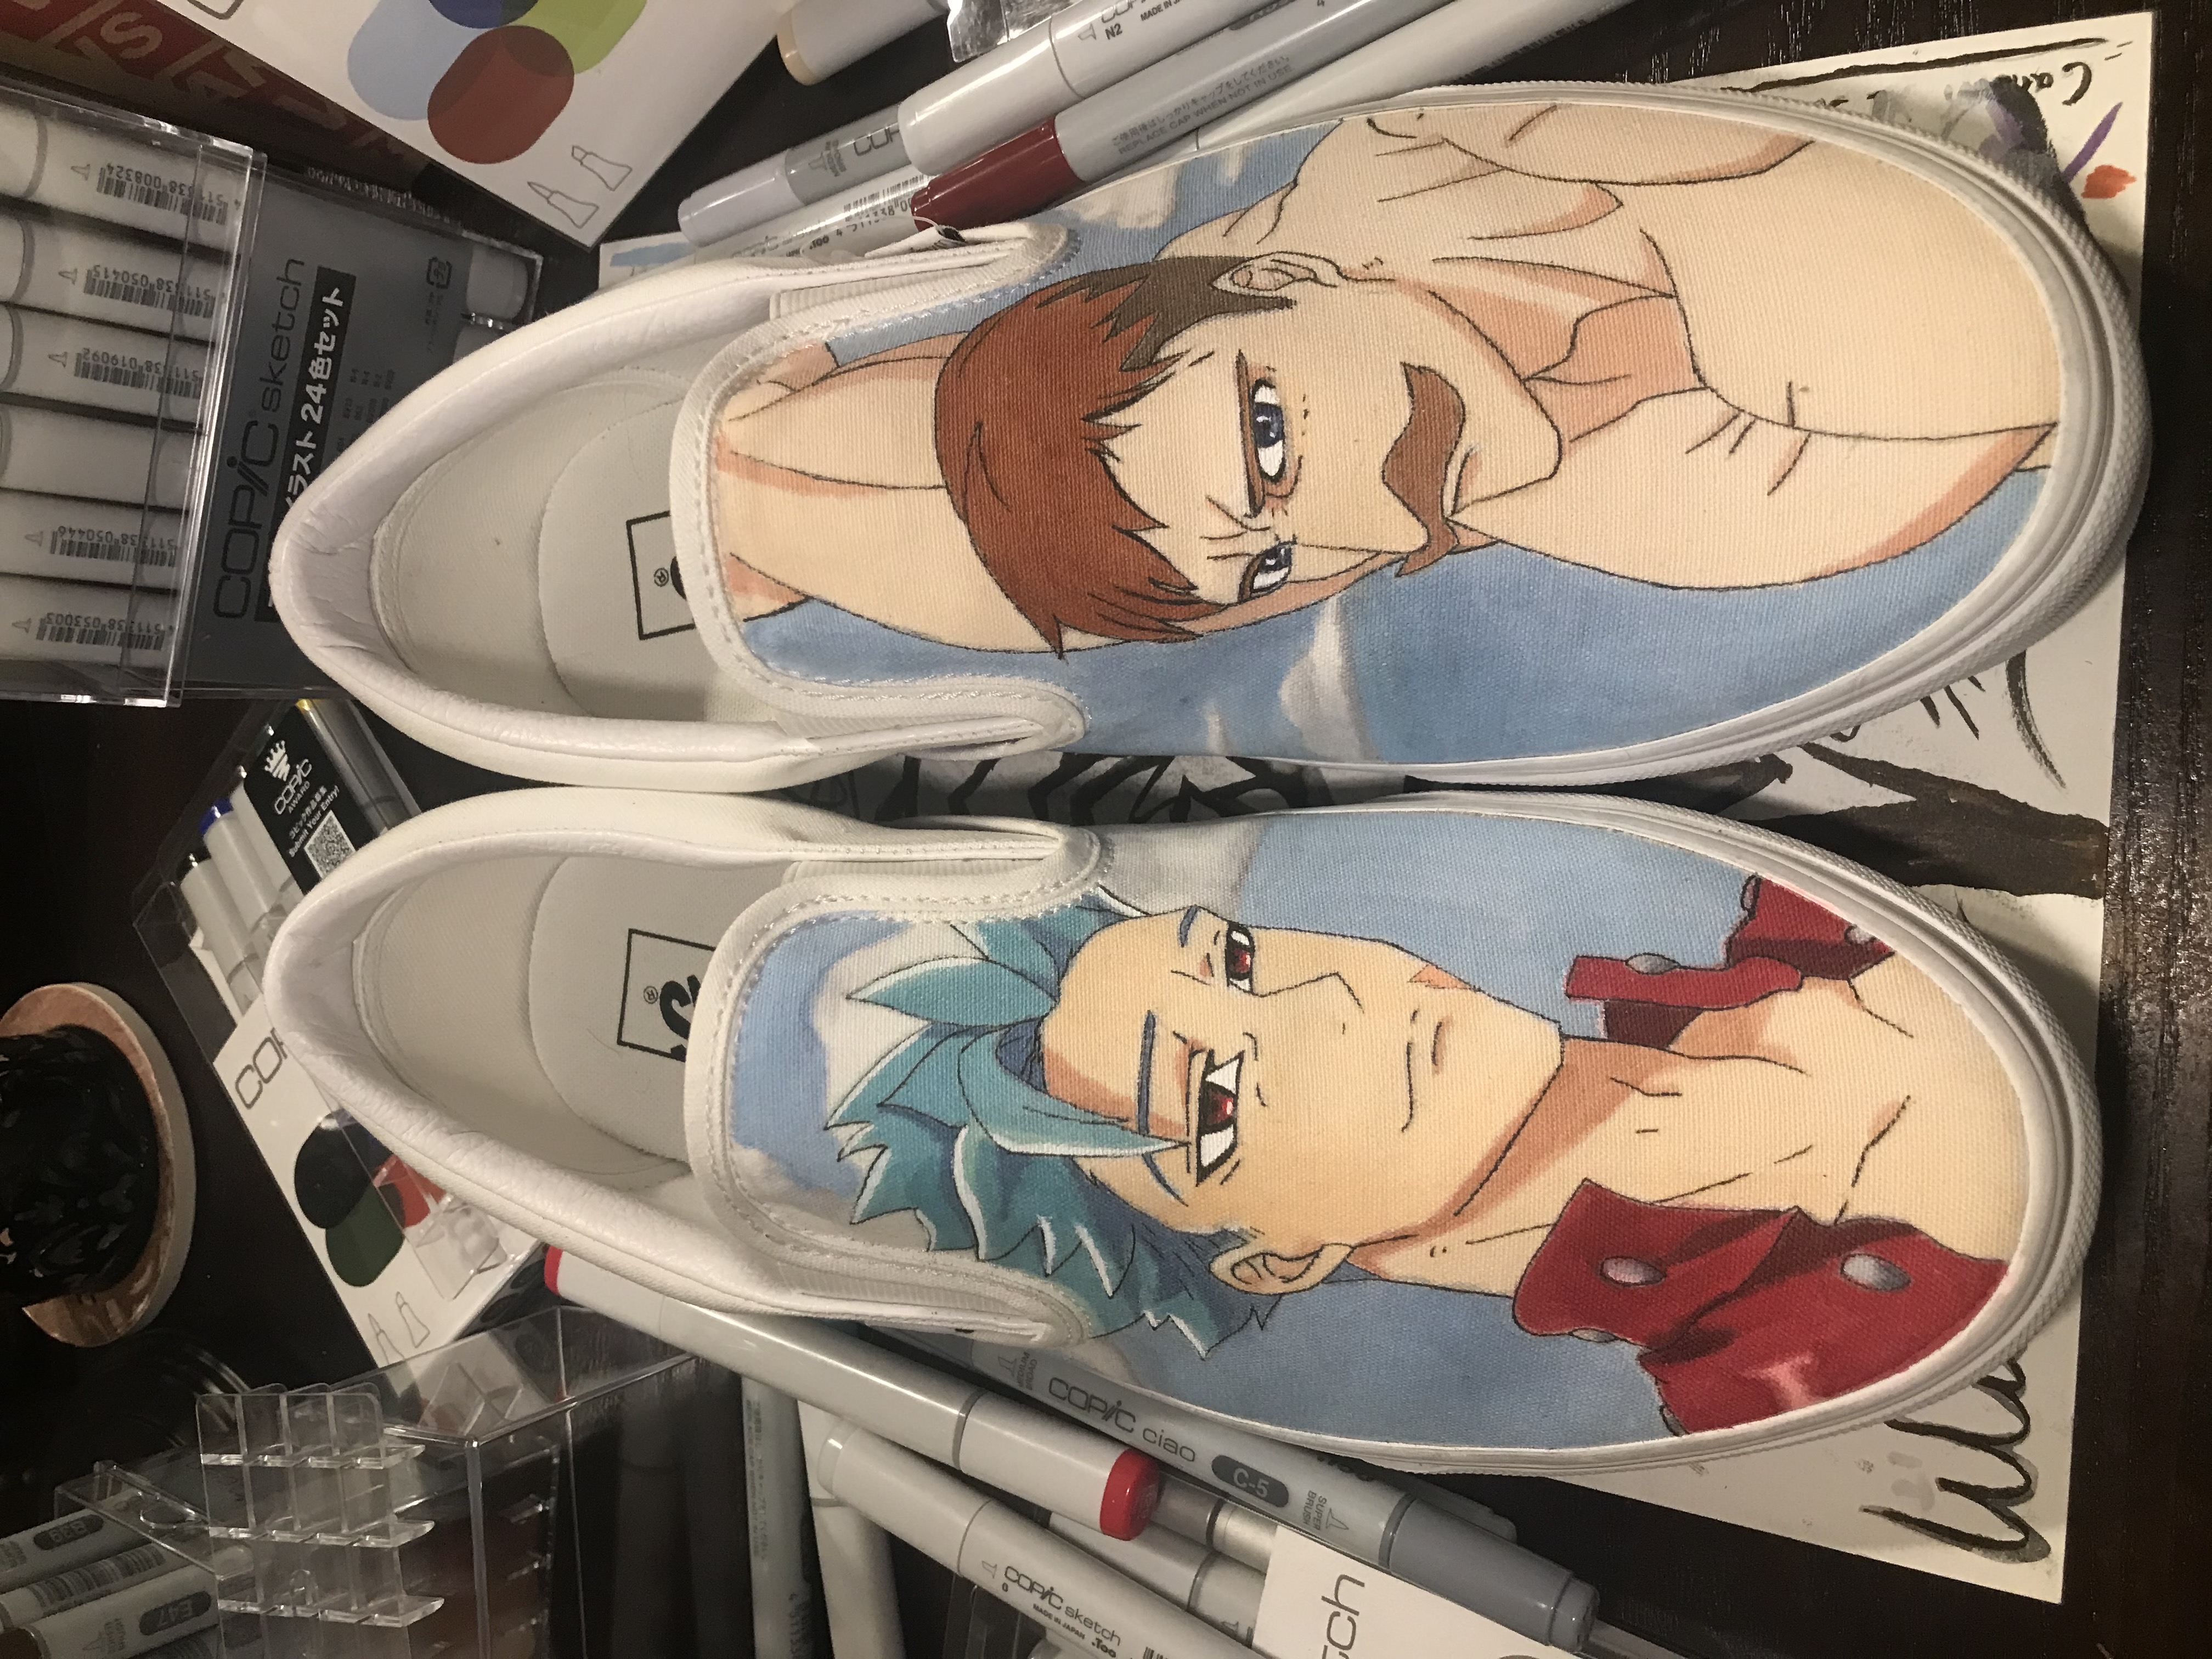 Ban and Escanor - 7 Deadly Custom Vans by 44Wildfire44 on DeviantArt